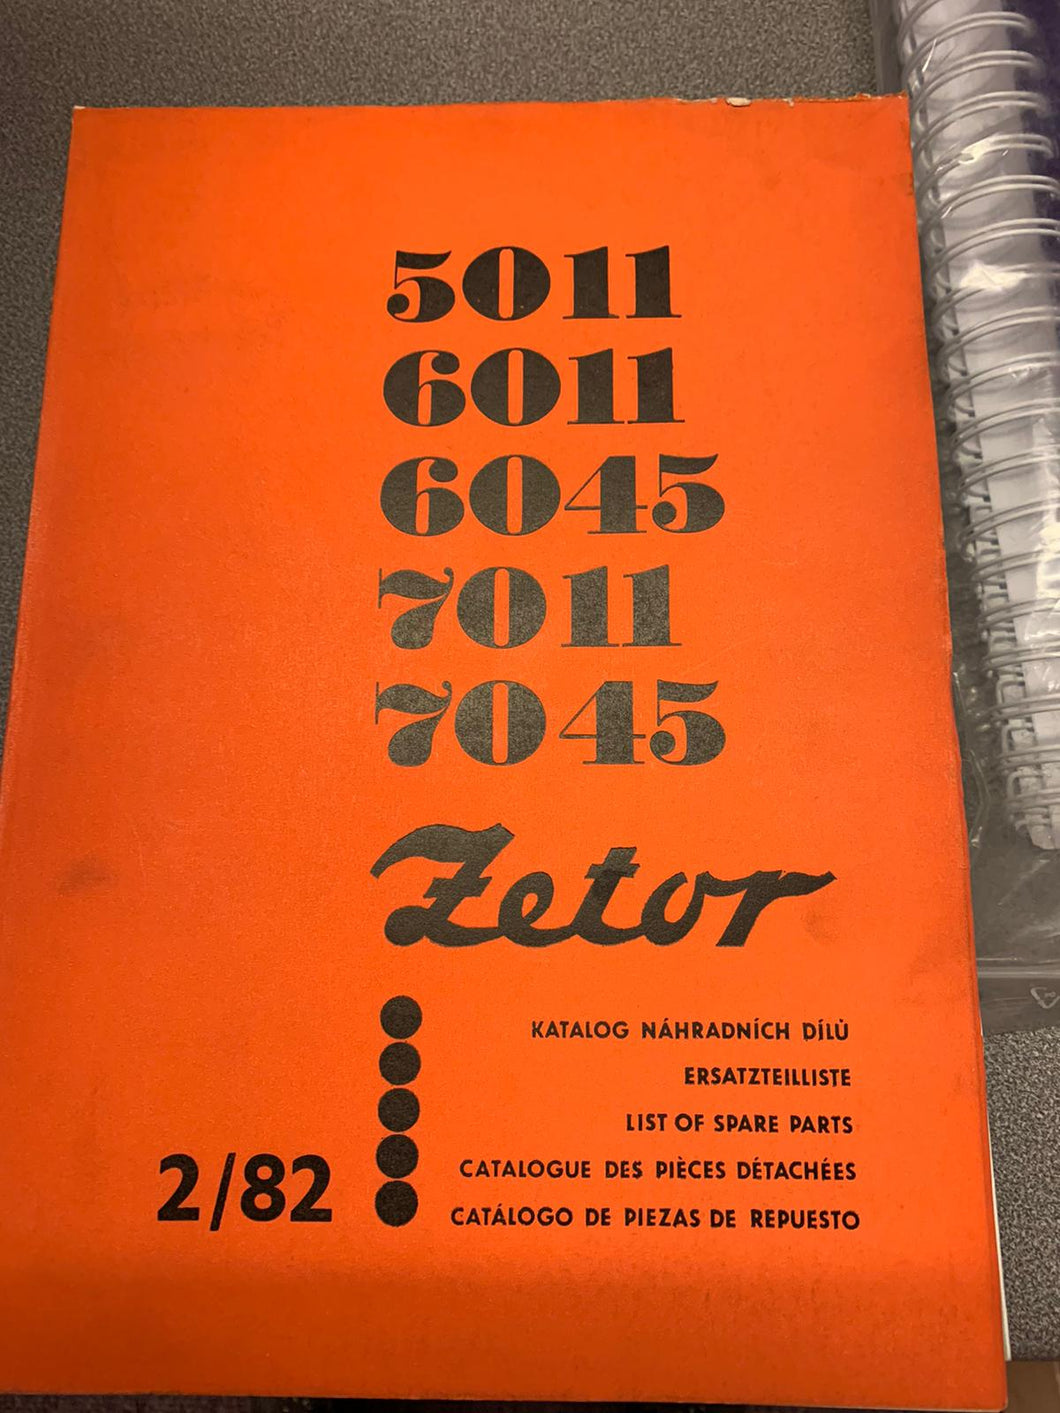 Spare Parts Manual for Zetor 5011, 6011, 6045, 7011 and 7045.